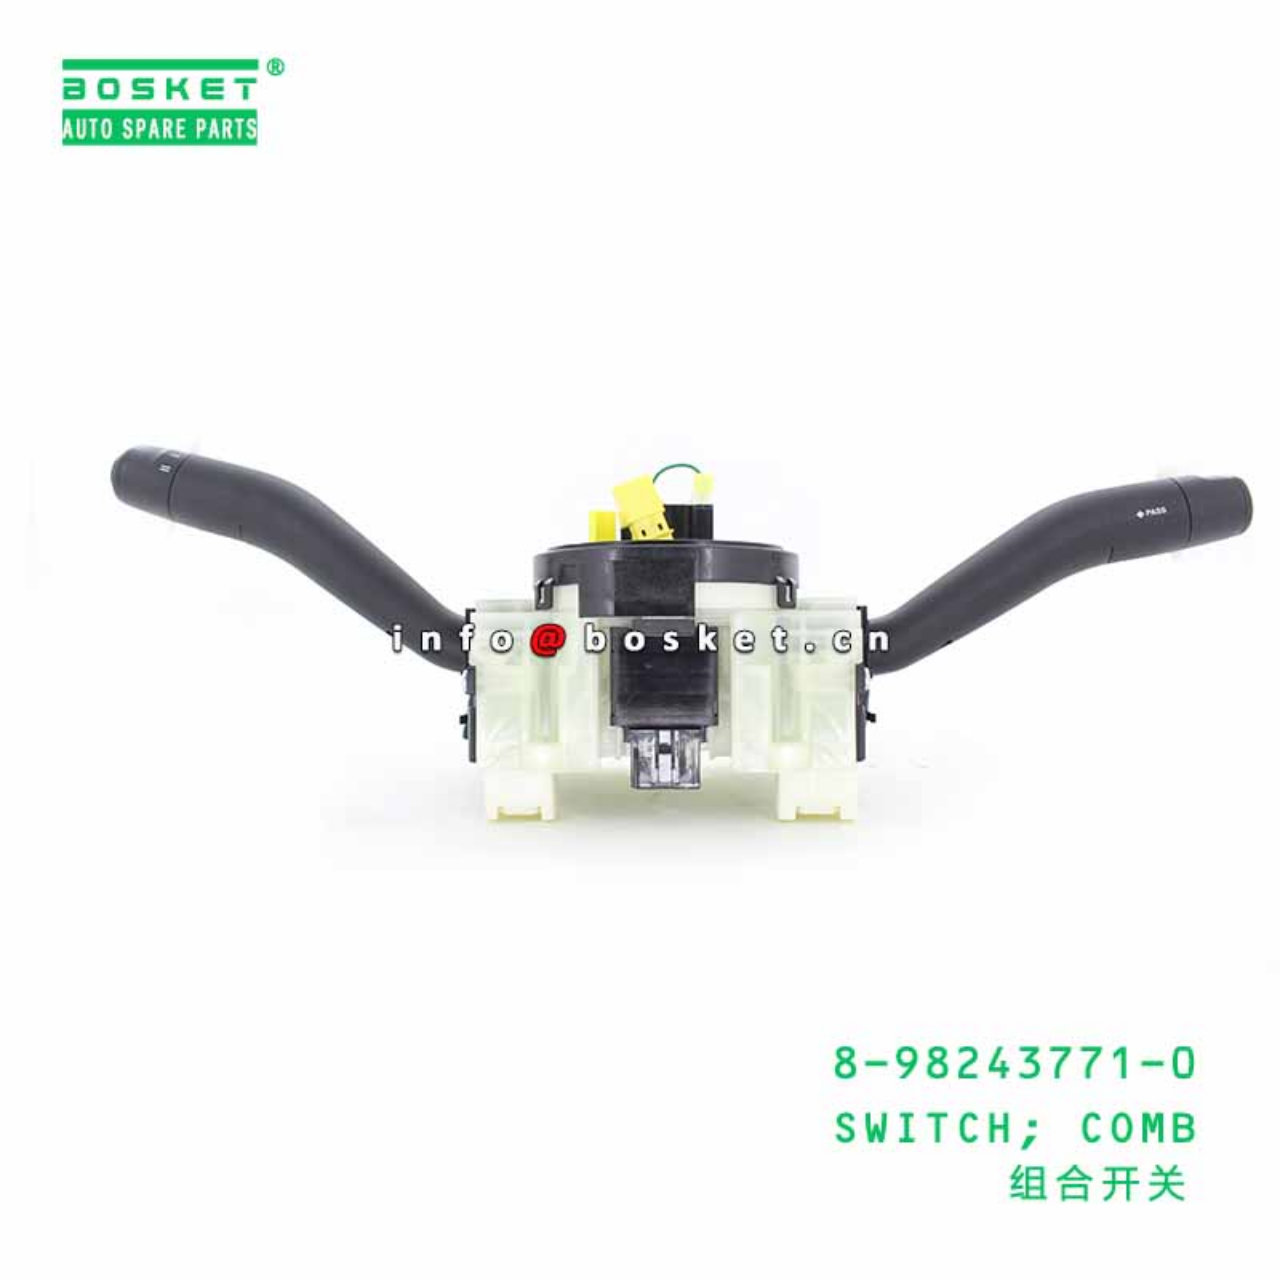 8-98243771-0 8982437710 COMBINATION SWITCH Suitable For ISUZU FCFGGG